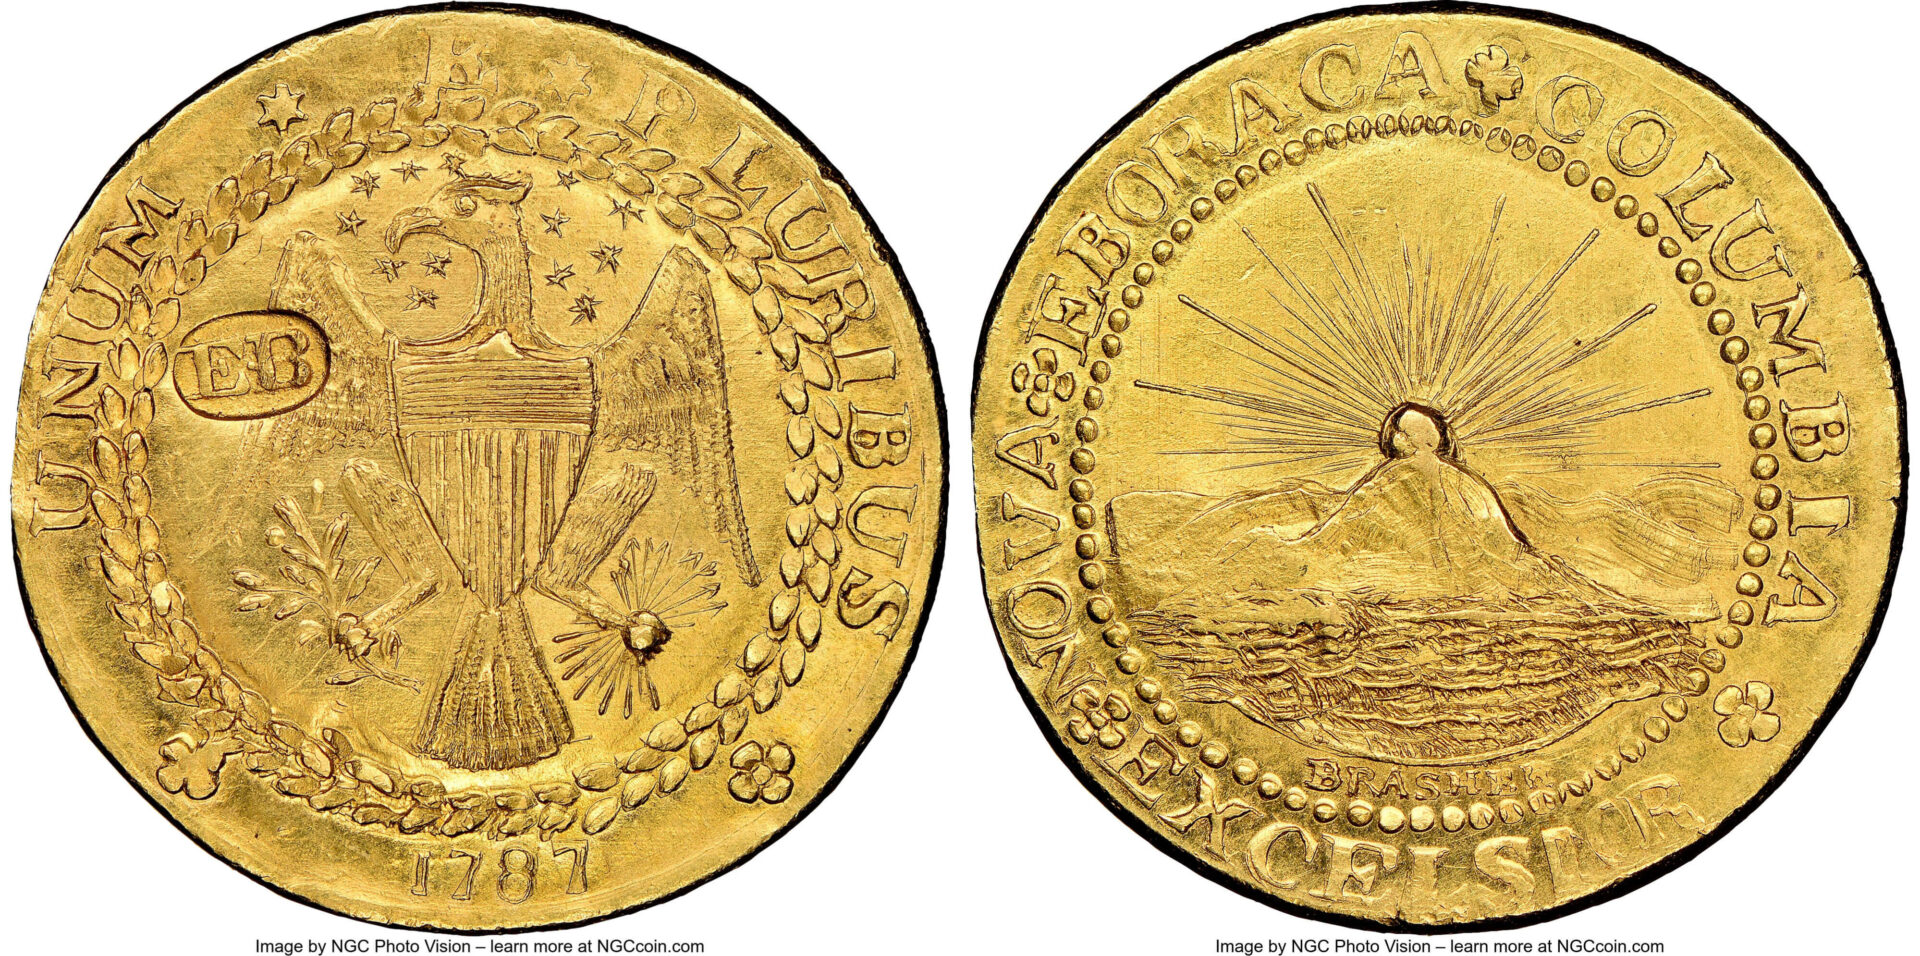 Million Why The Brasher Doubloon Is The Most Expensive Gold Coin Of The World CoinsWeekly